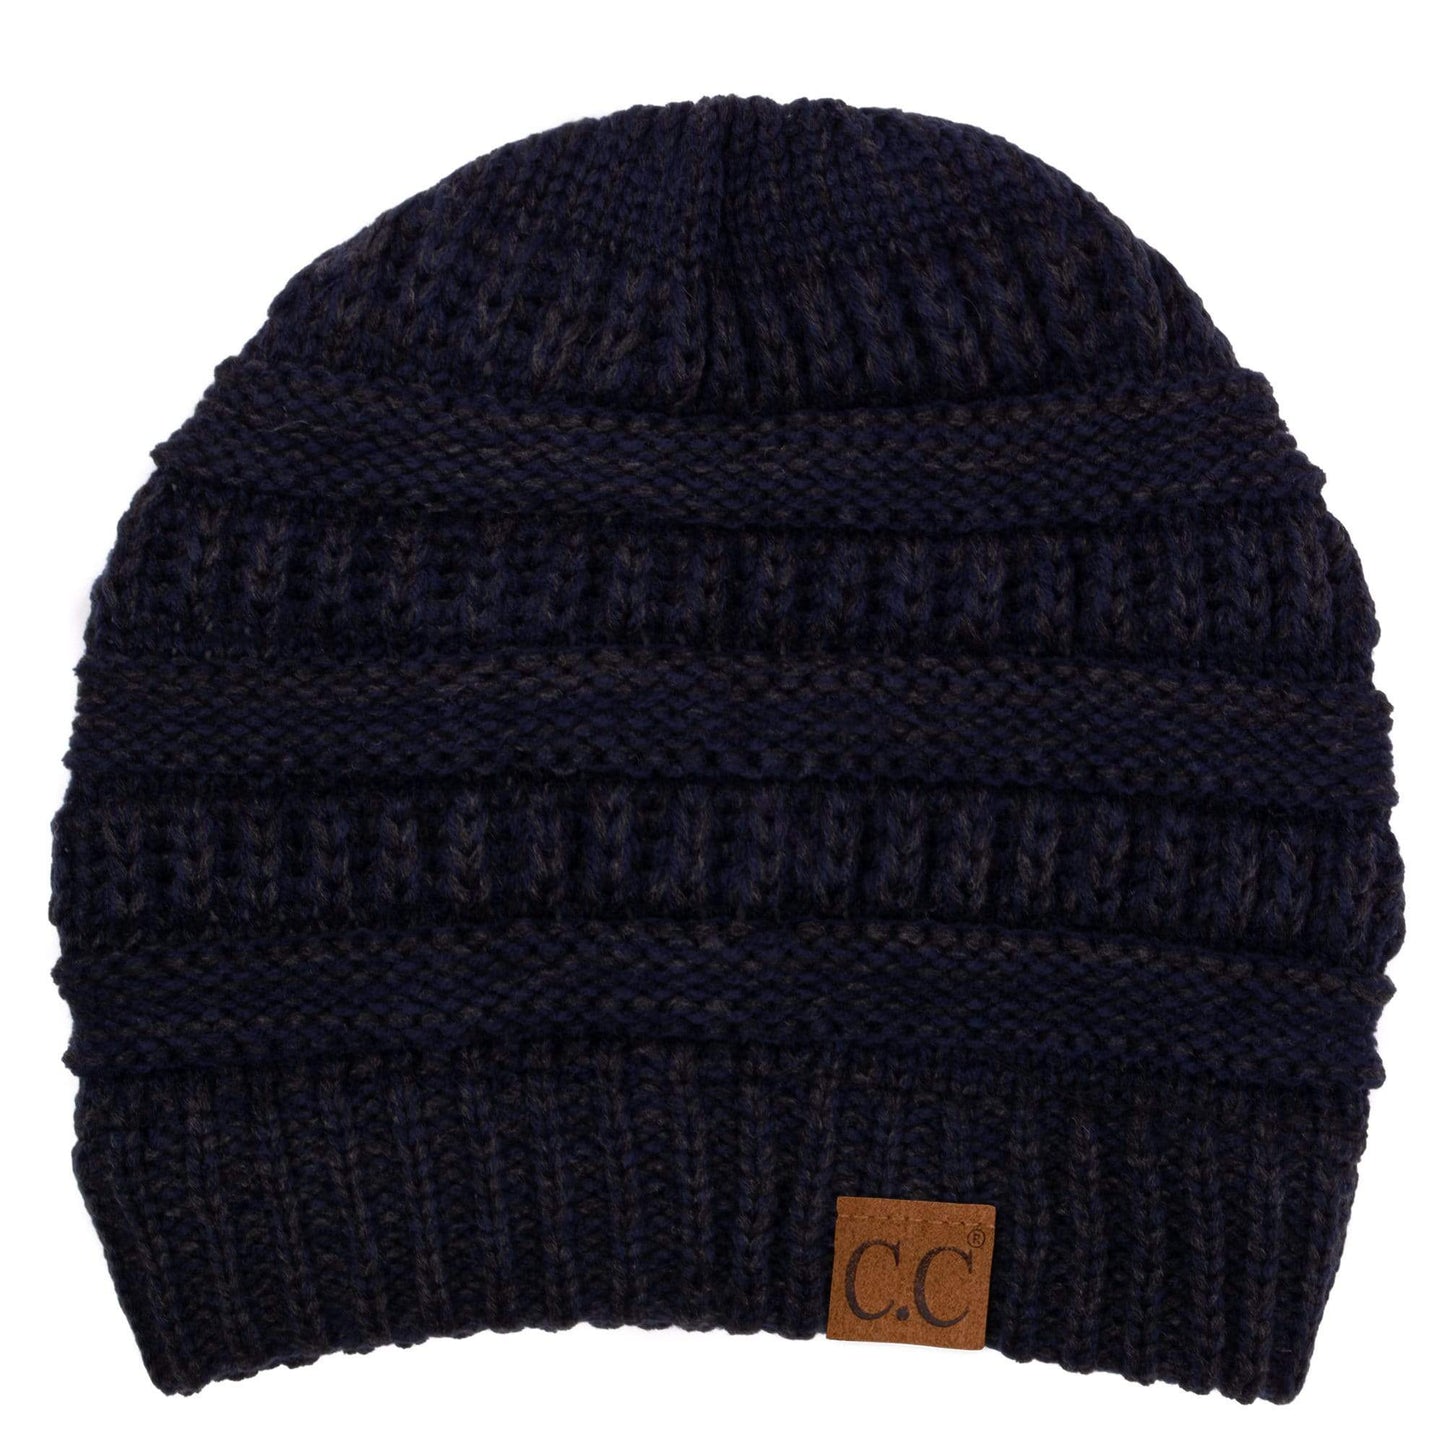 C.C Apparel Two Tone Navy/Grey C.C Trendy Warm Chunky Soft Stretch Two-Toned Cable Knit Beanie Skully